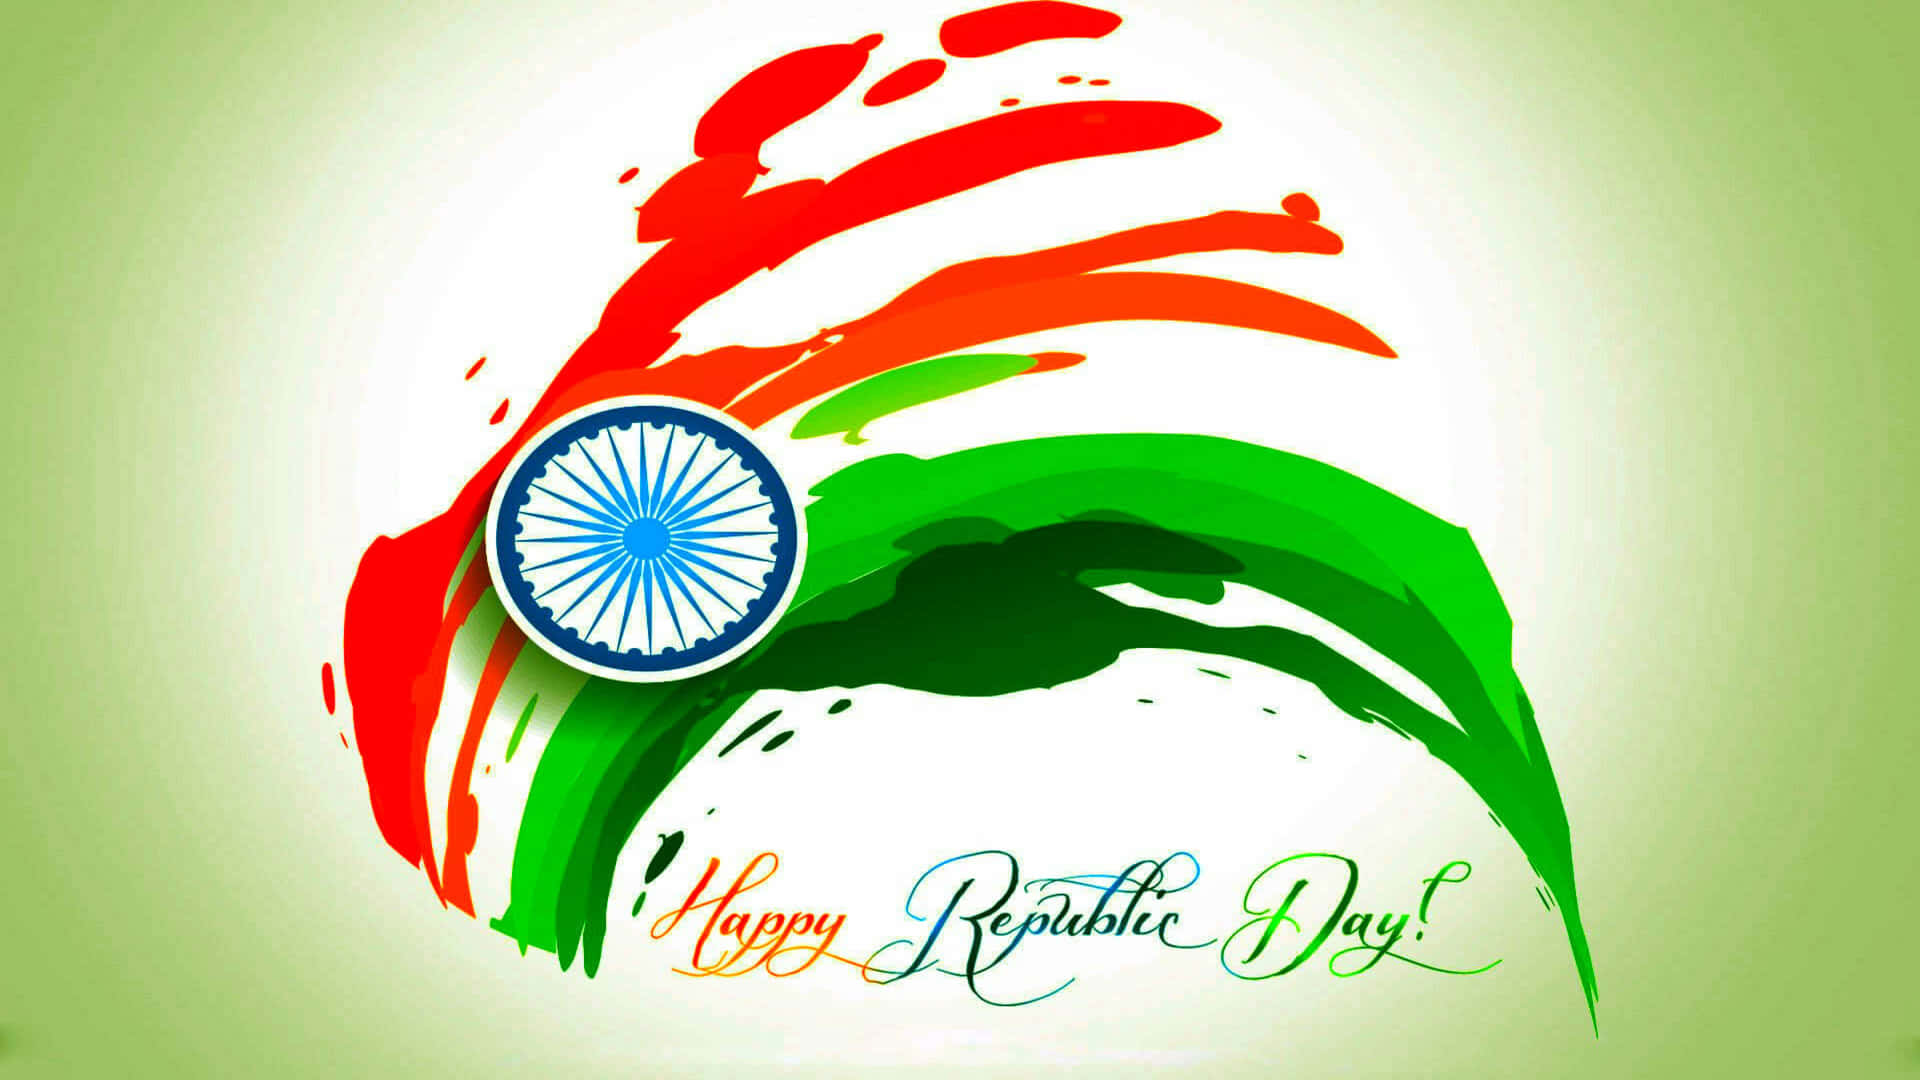 "celebrating Republic Day With Honor And Pride"